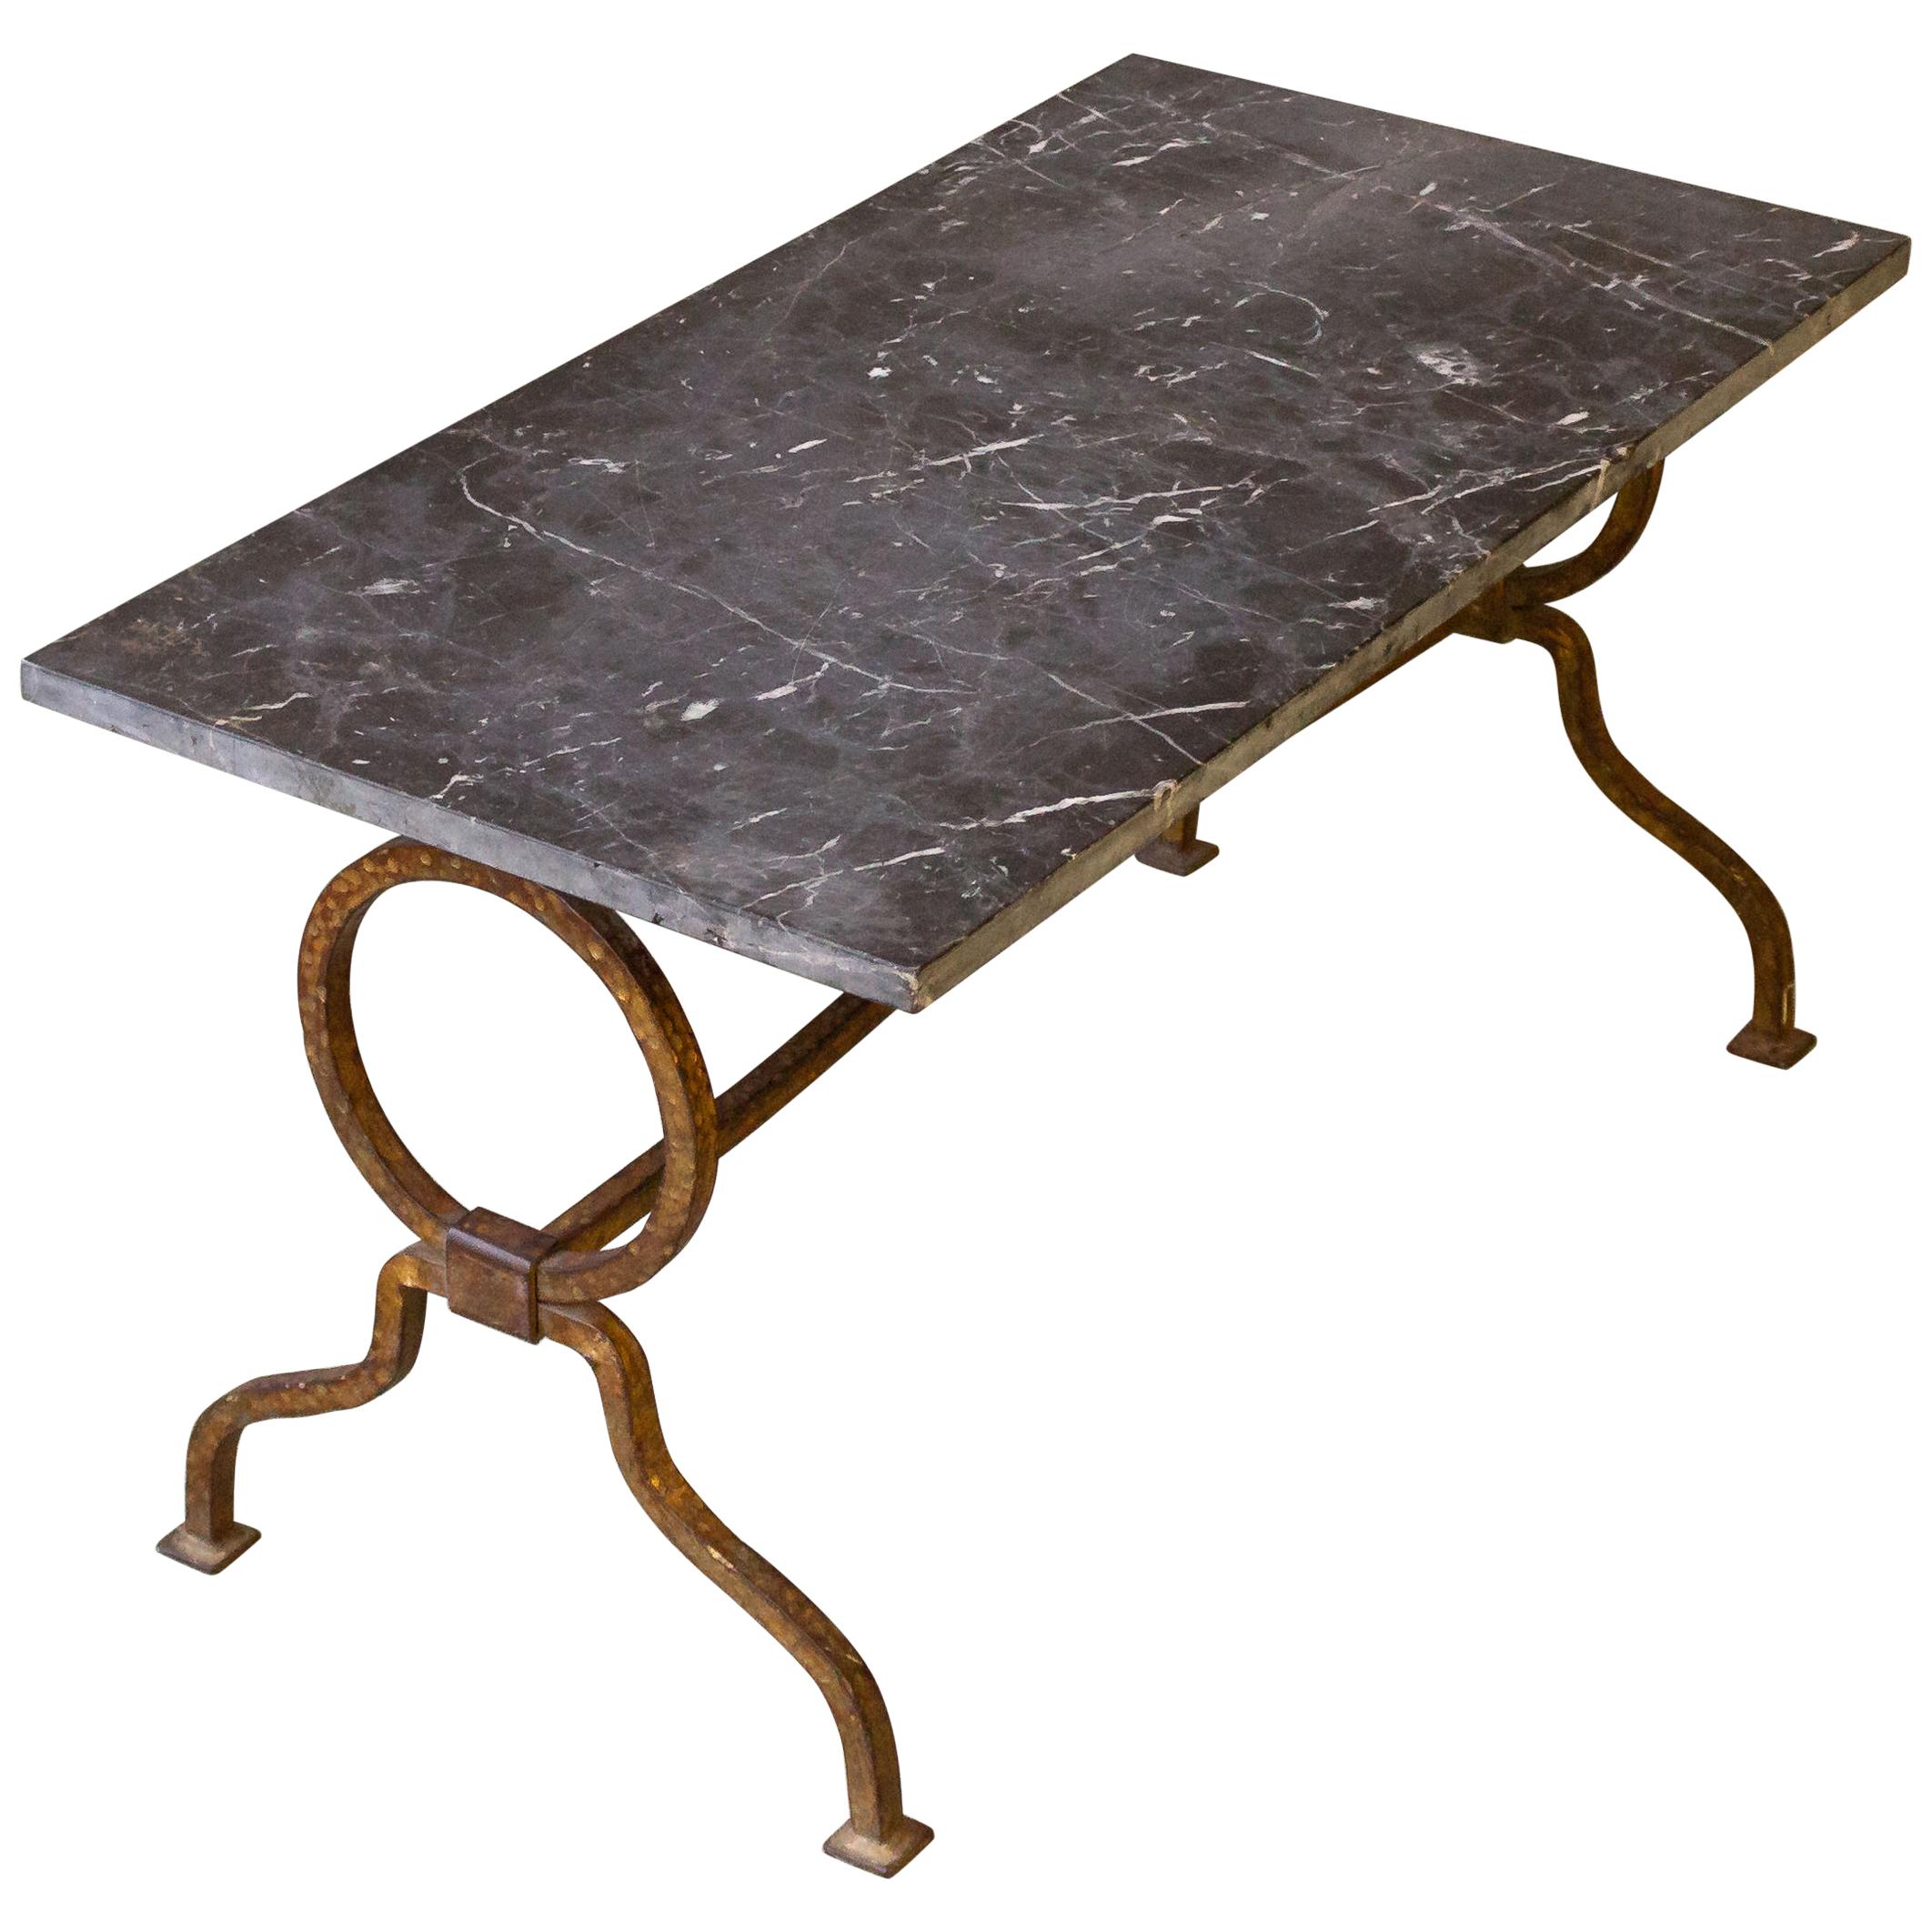 1940s Spanish Gilt Iron Table with Marble Top